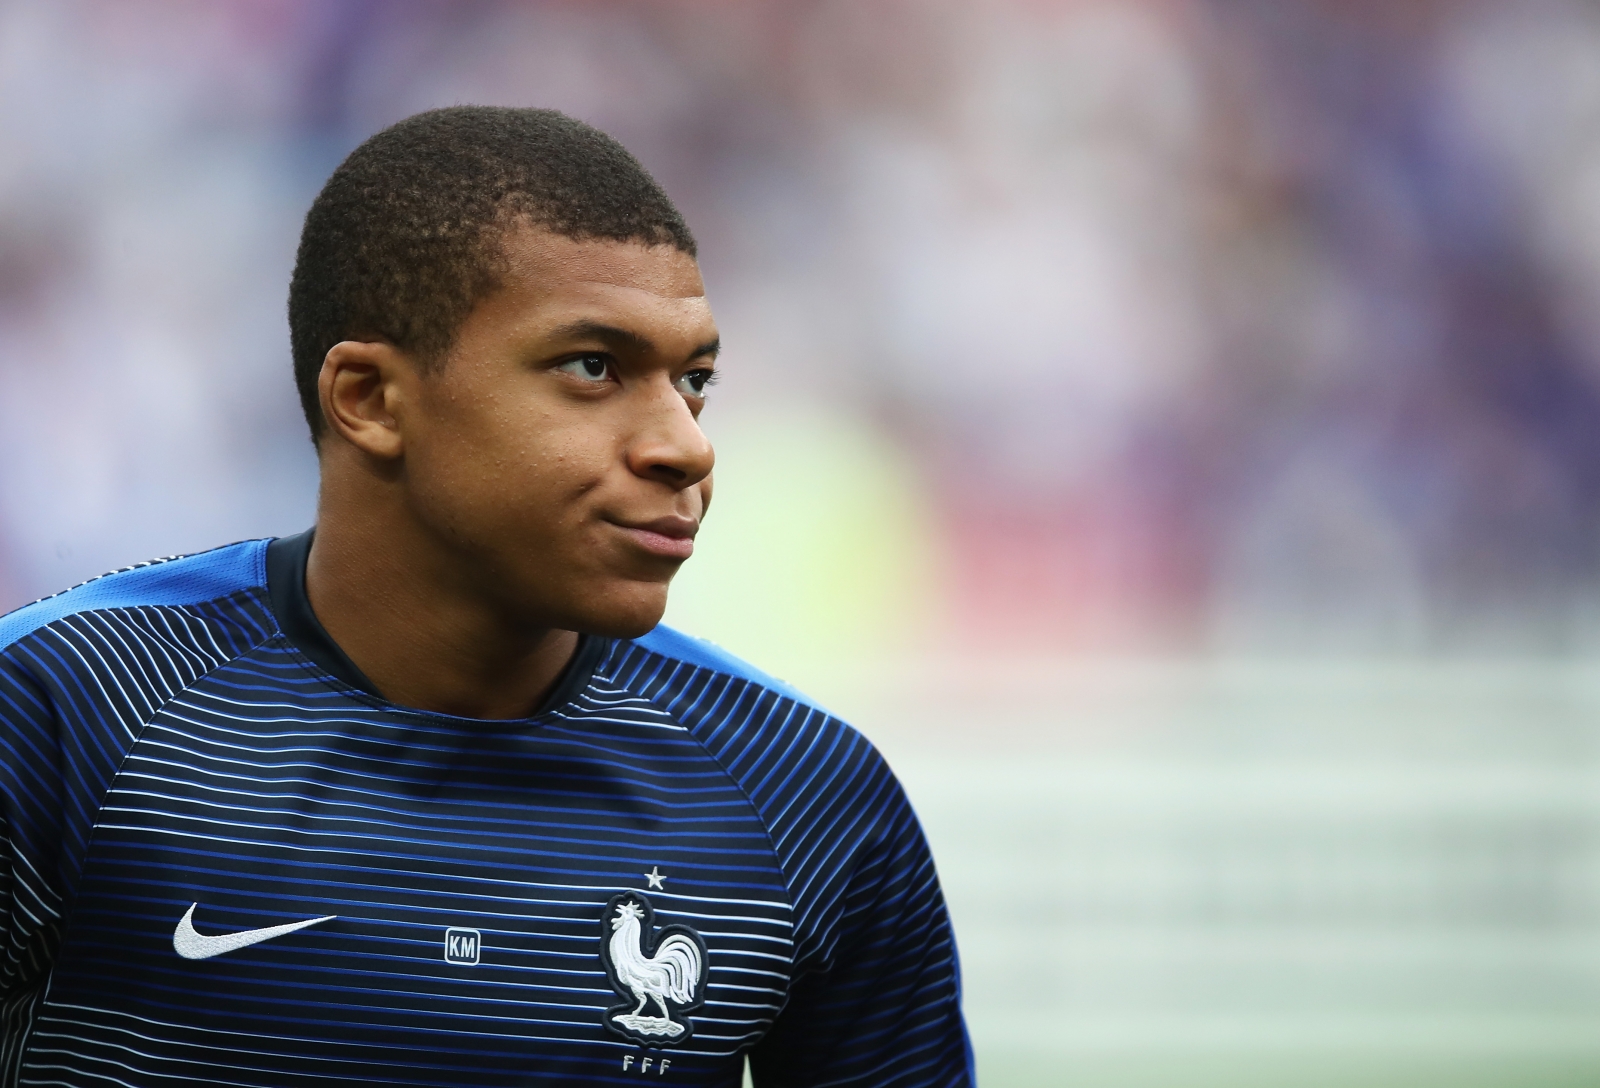 Real Madrid president Florentino Perez finally confirms interest in Arsenal target Kylian Mbappe